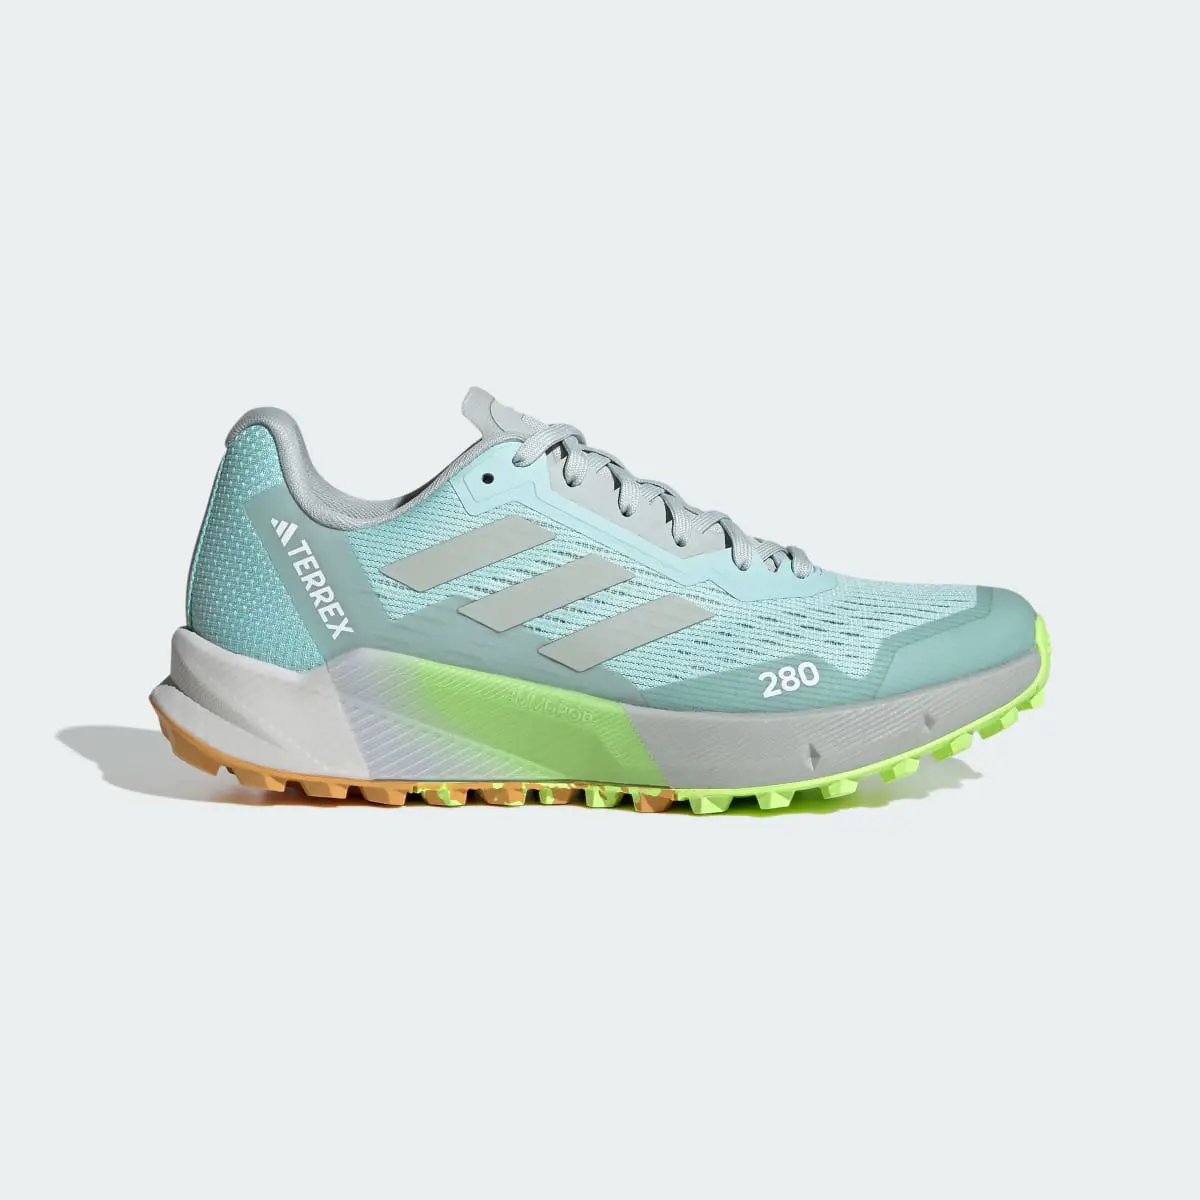 Adidas Terrex Agravic Flow 2.0 Trail Running Shoes. 2